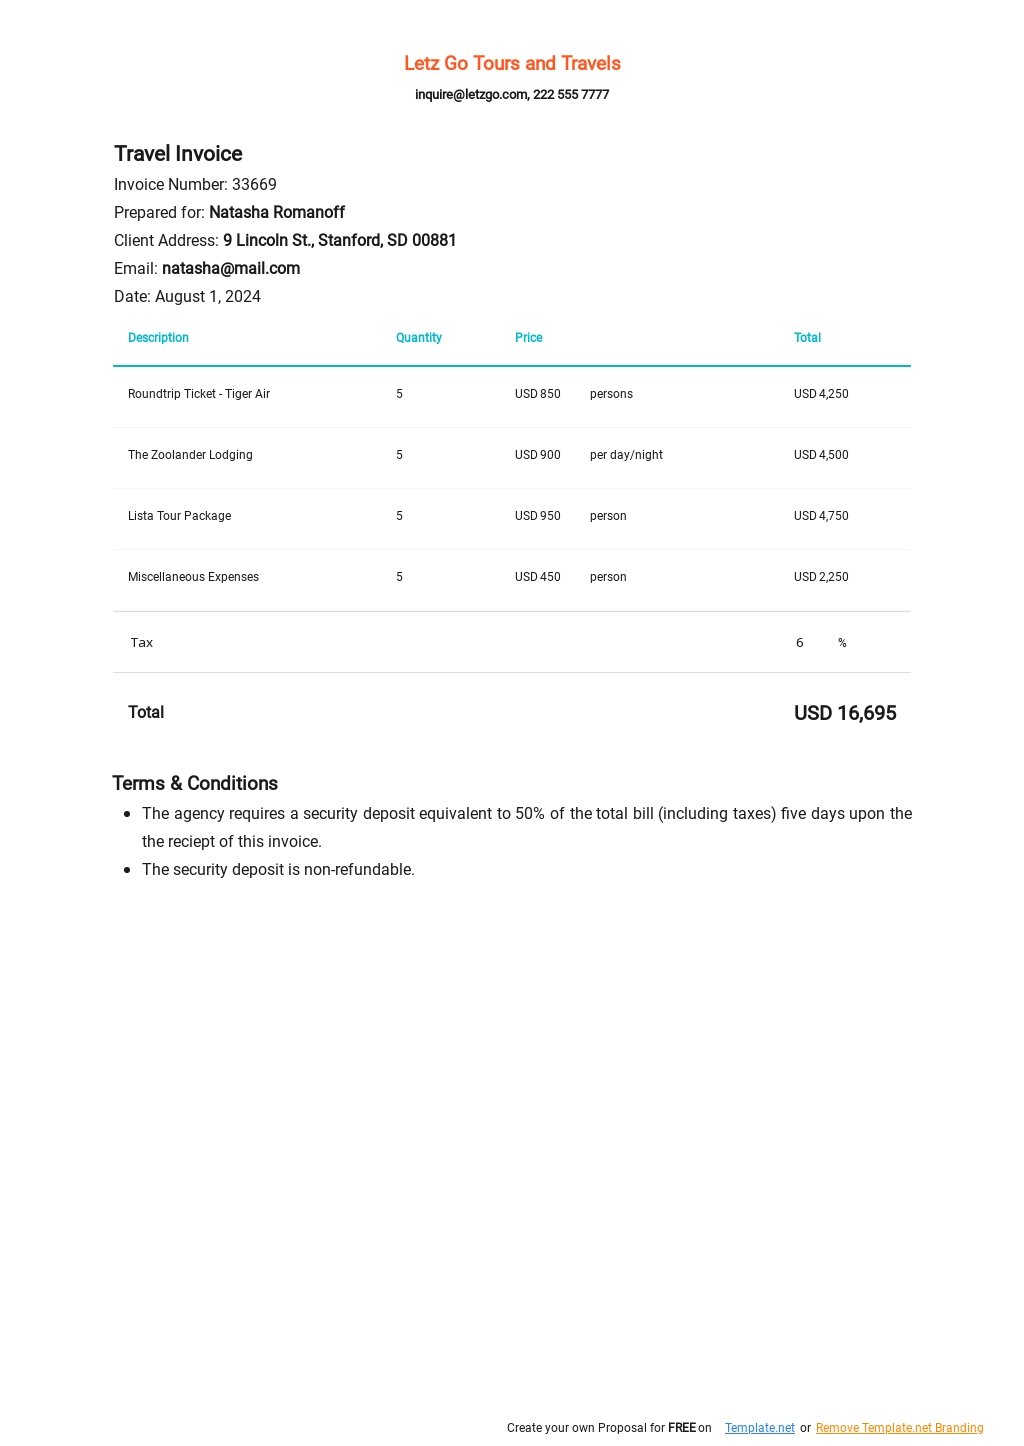 Tour and Travel Invoice Template.jpe